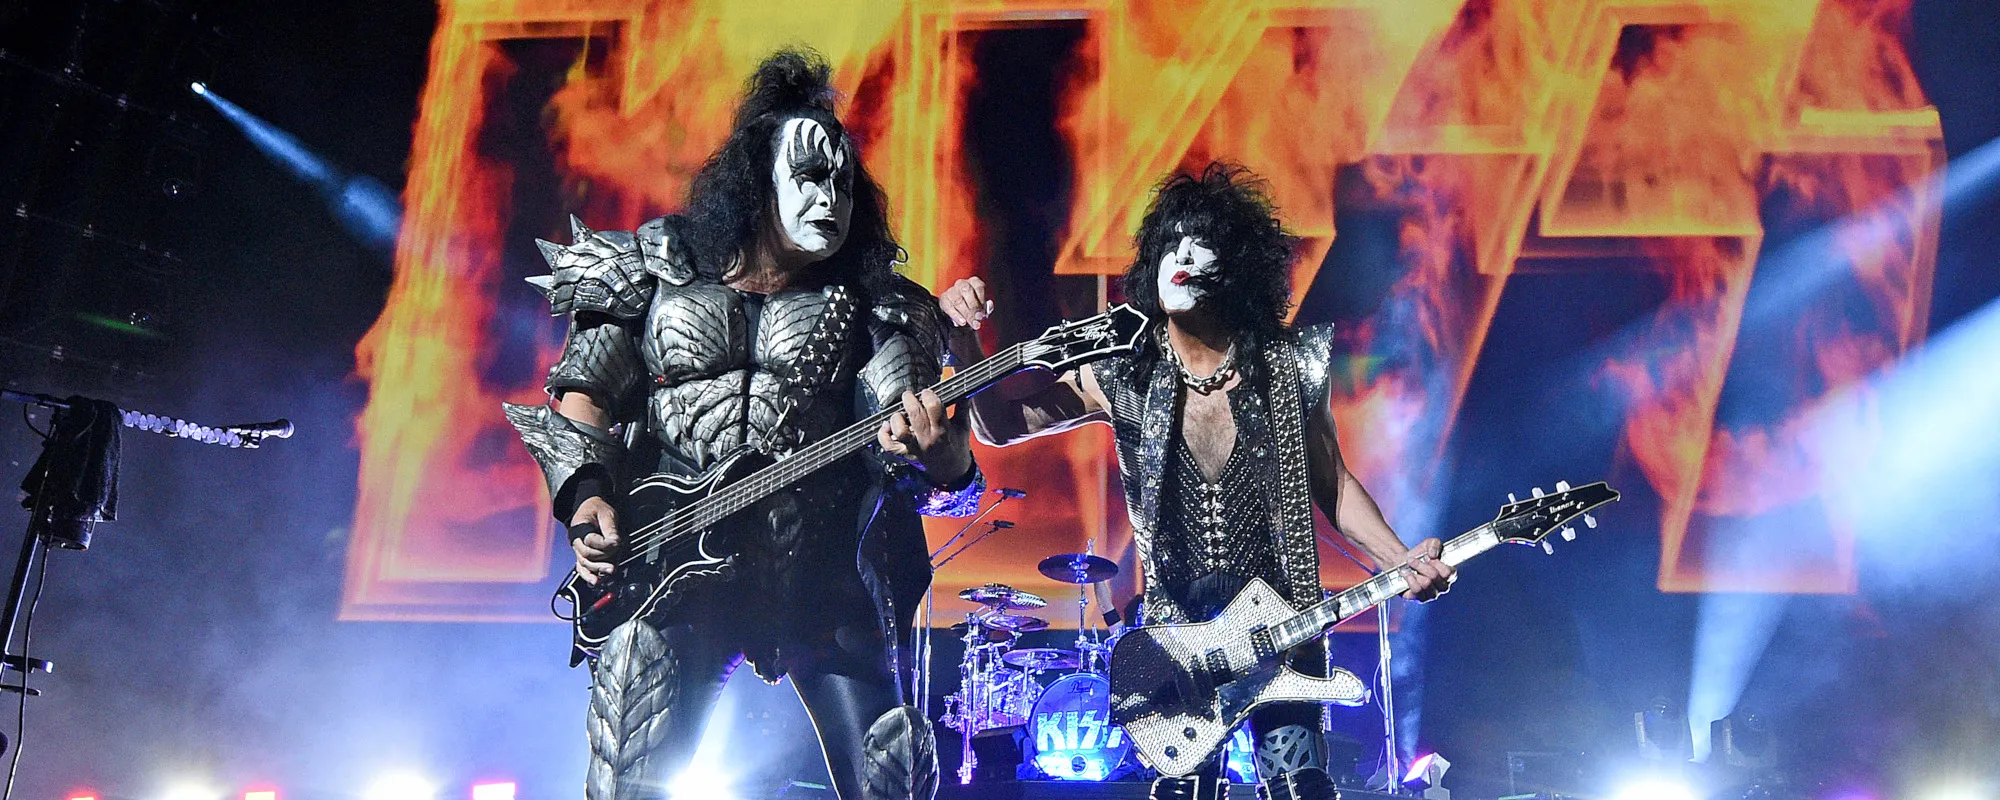 Family of Late KISS Guitar Tech Launches Wrongful Death Lawsuit Against the Band